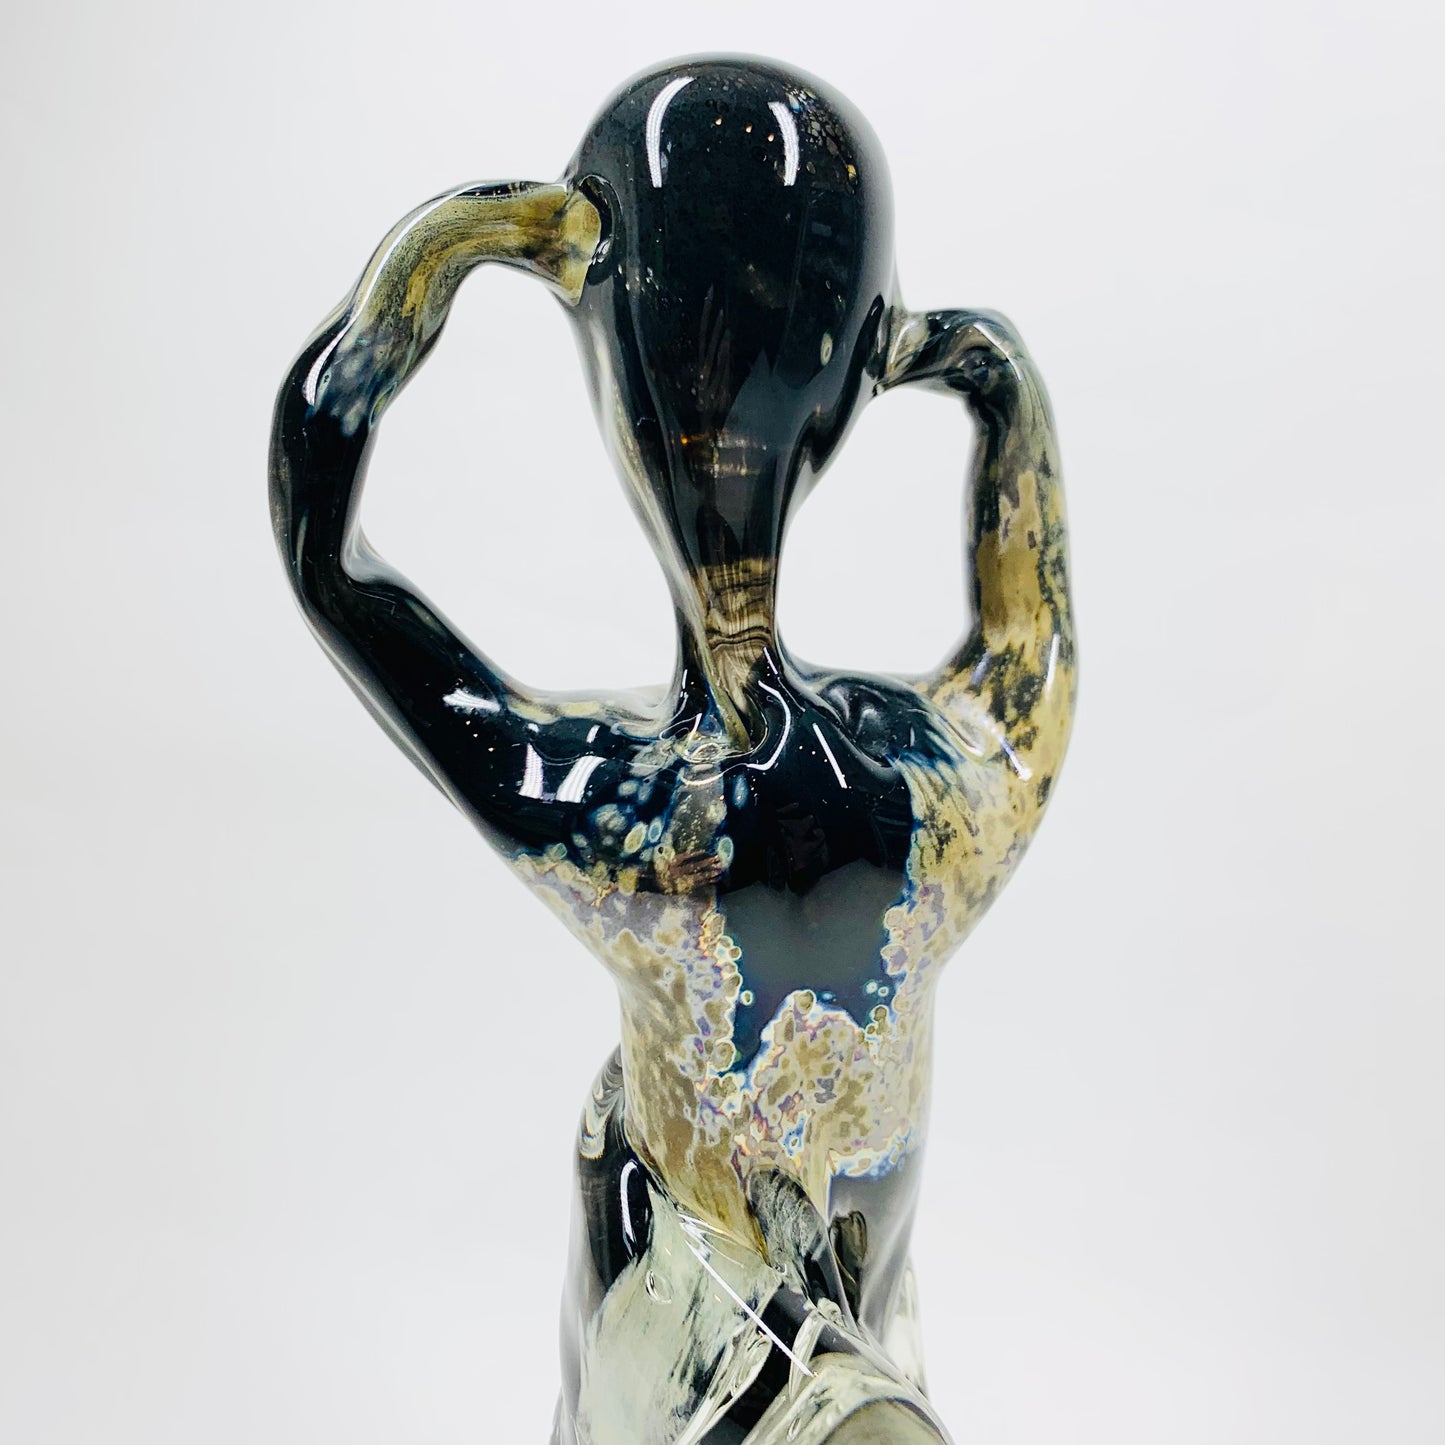 Vintage Murano abstract art glass sculpture of a dancer with aventurine